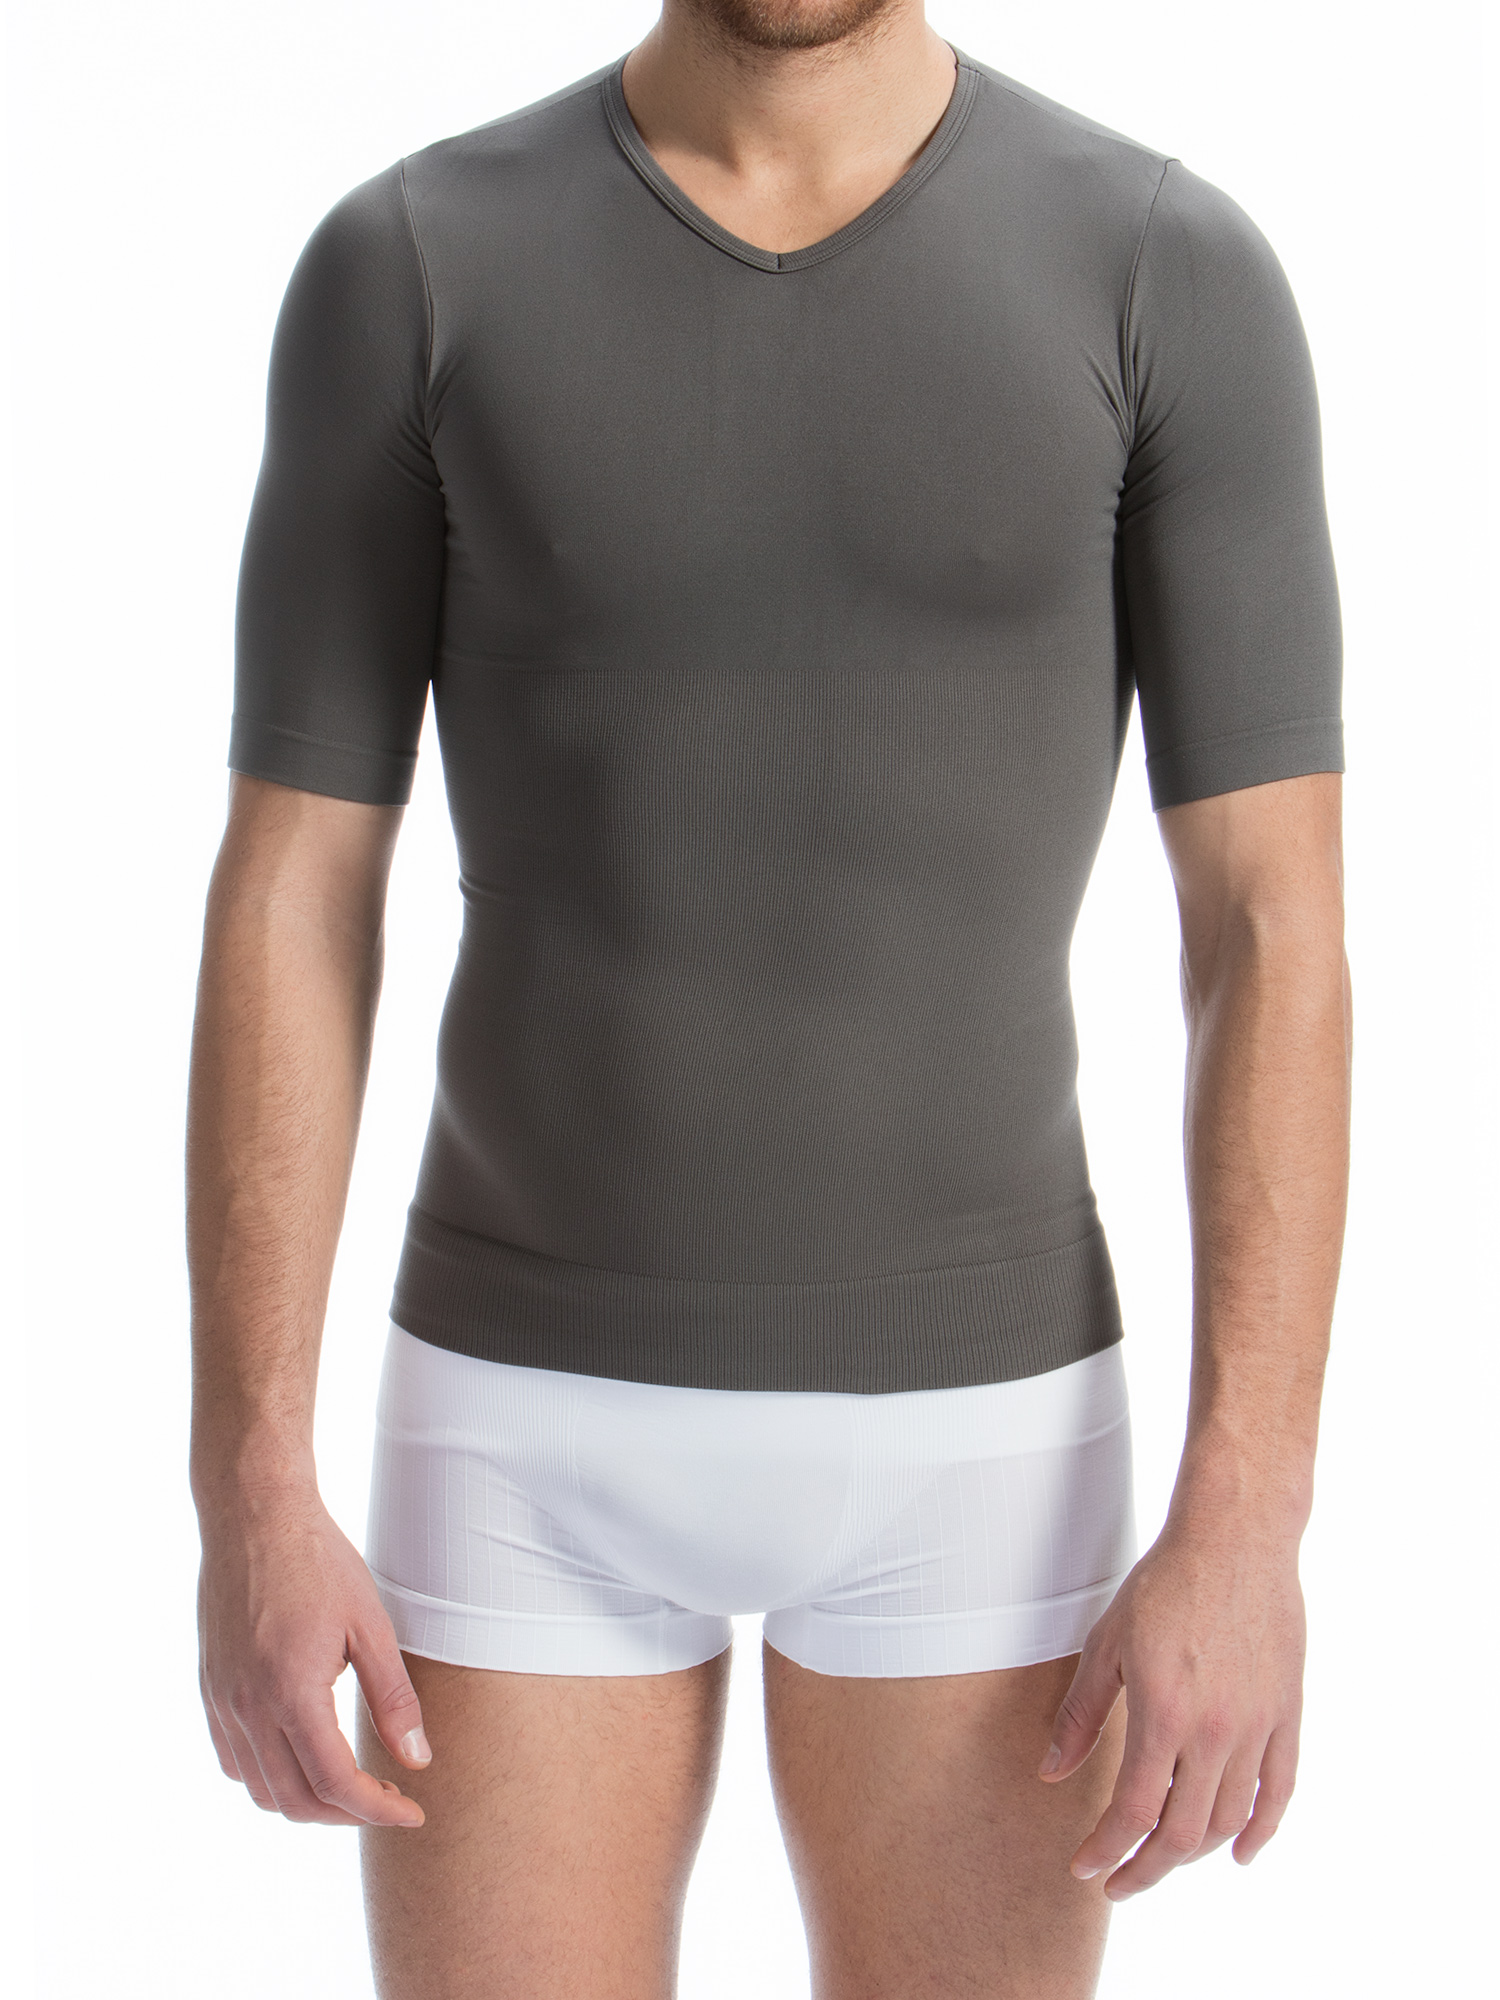 Men's Control Body Shaping with HEAT and yarn